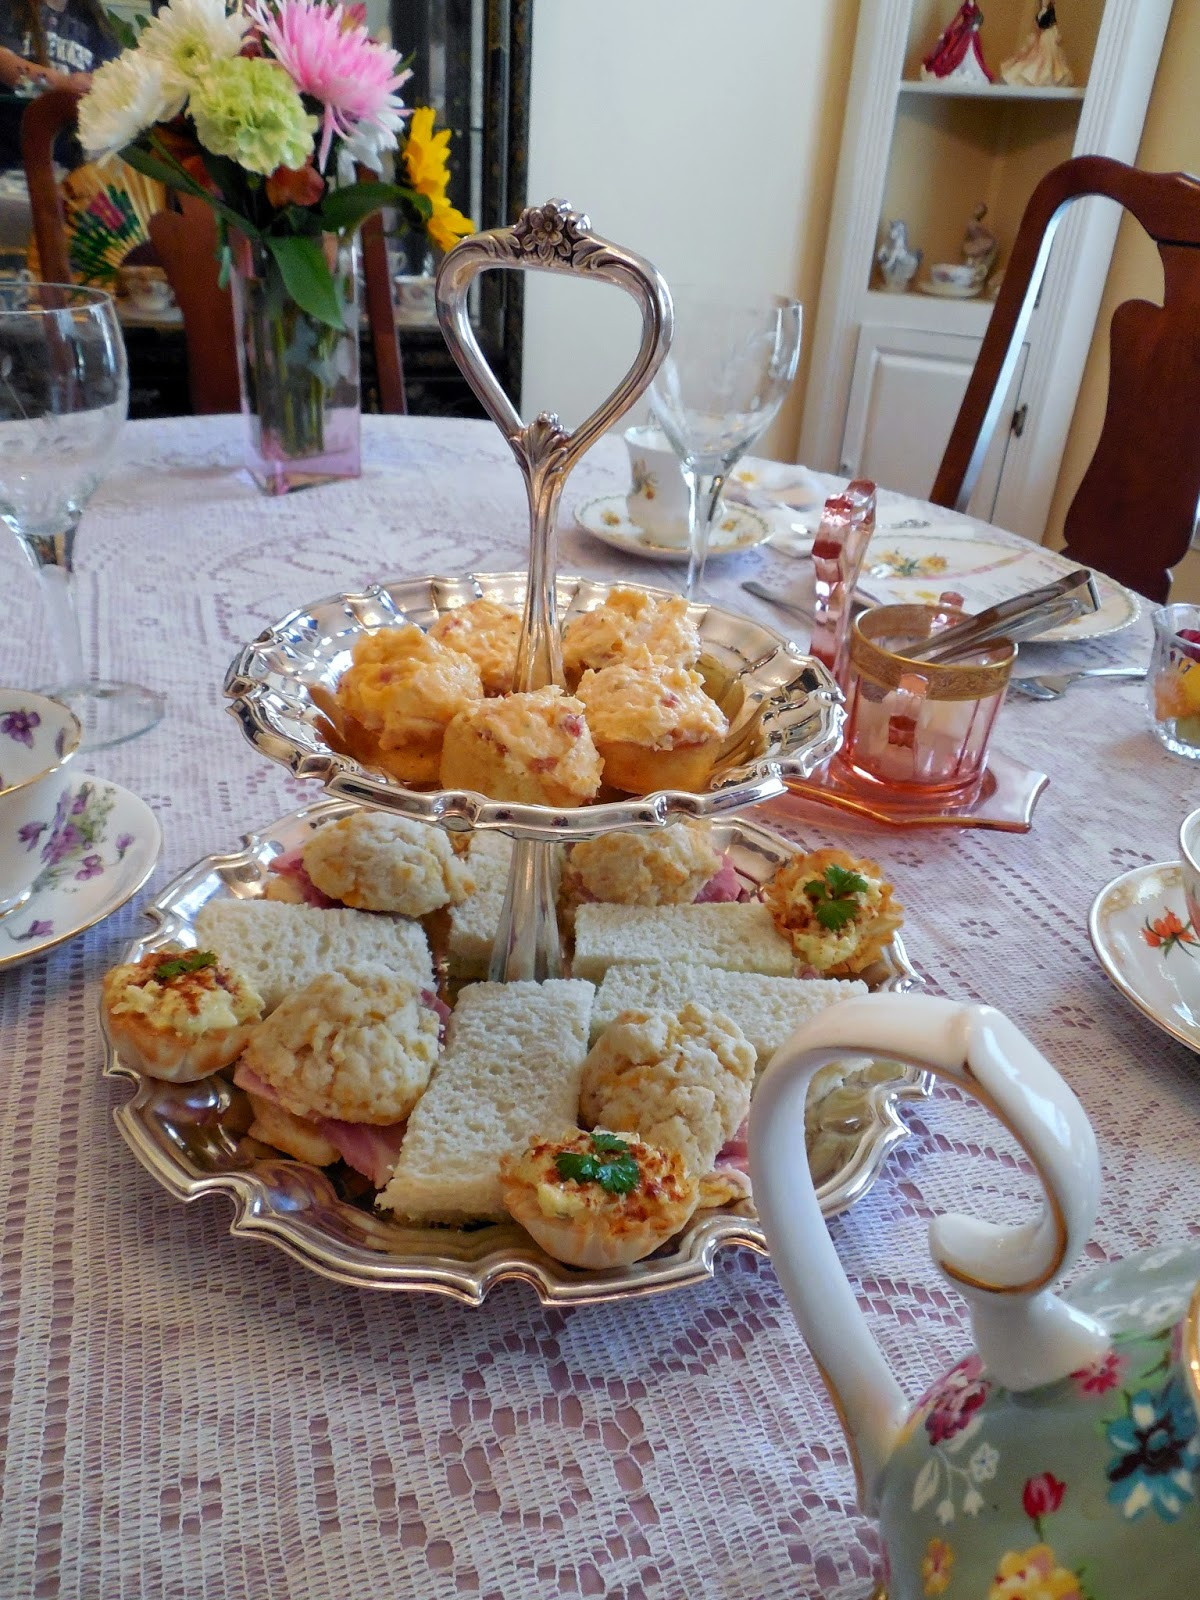 Summer Afternoon Tea Party Ideas
 Teatime Journeys A Southern Summer Tea Party